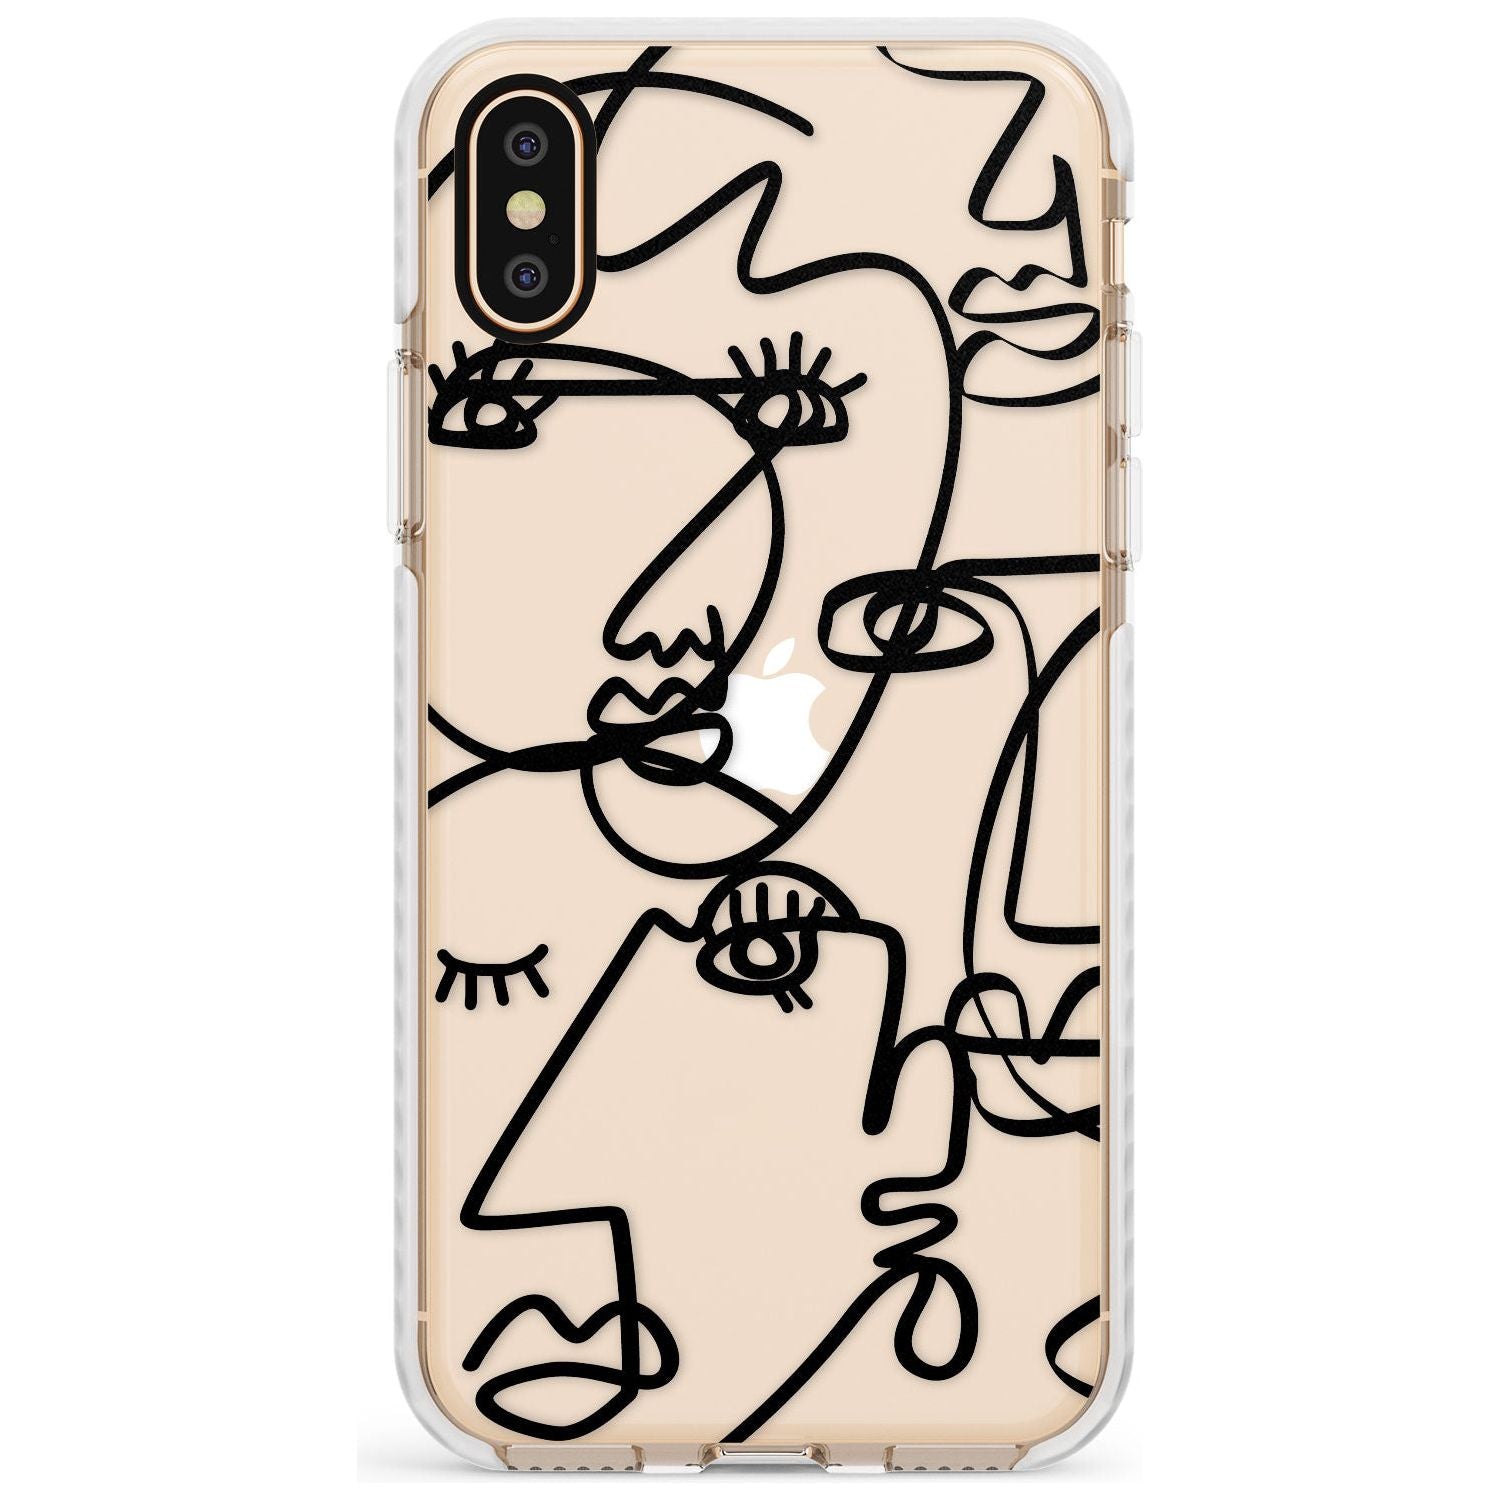 Continuous Line Faces: Black on Clear Slim TPU Phone Case Warehouse X XS Max XR